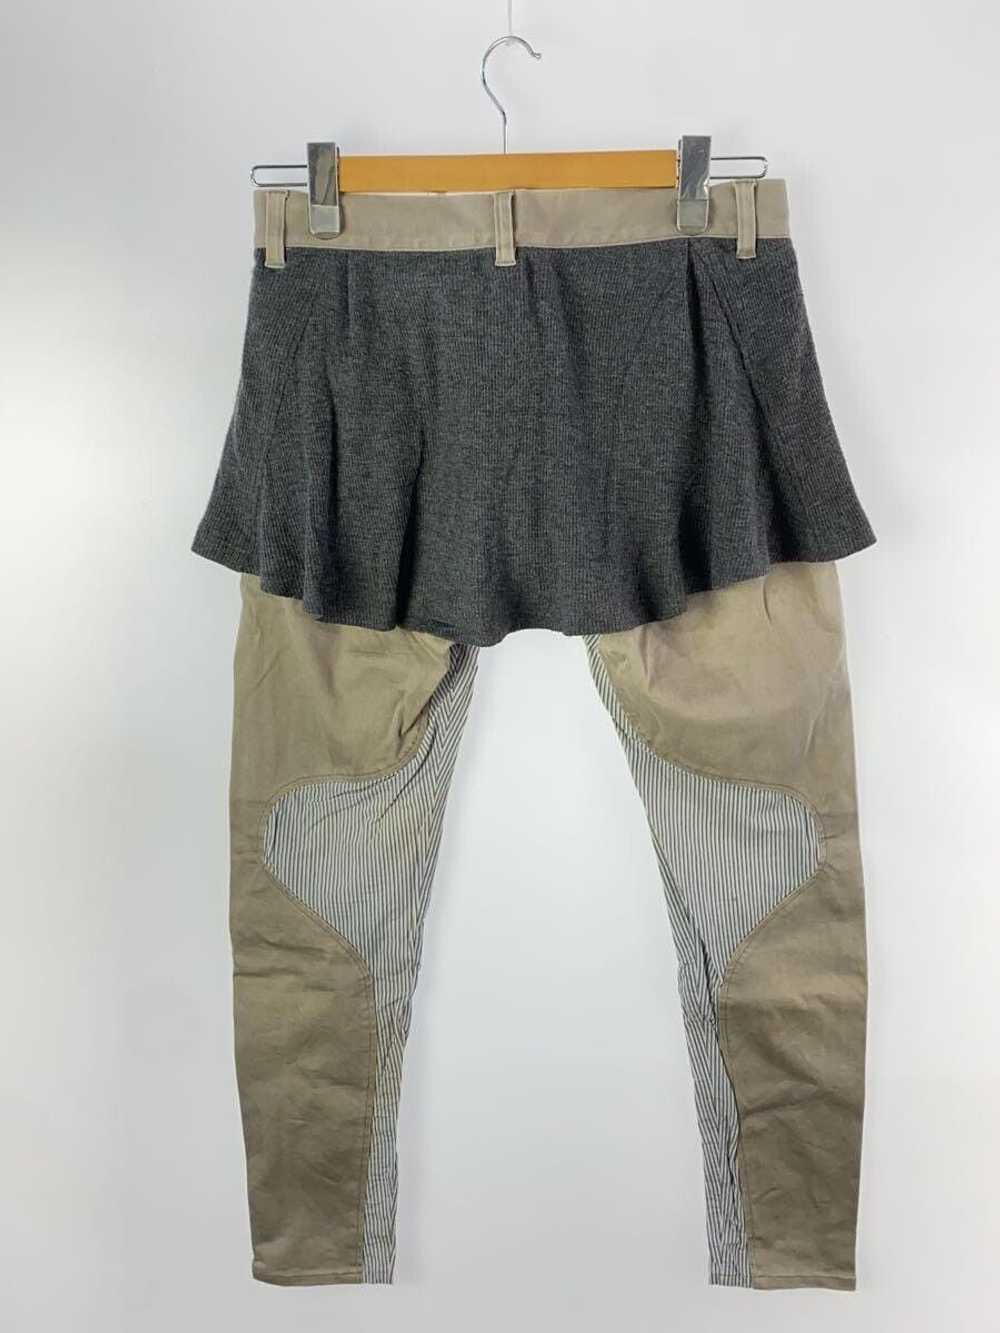 Undercover 🐎 SS12 Open Strings Hybrid Pants - image 2